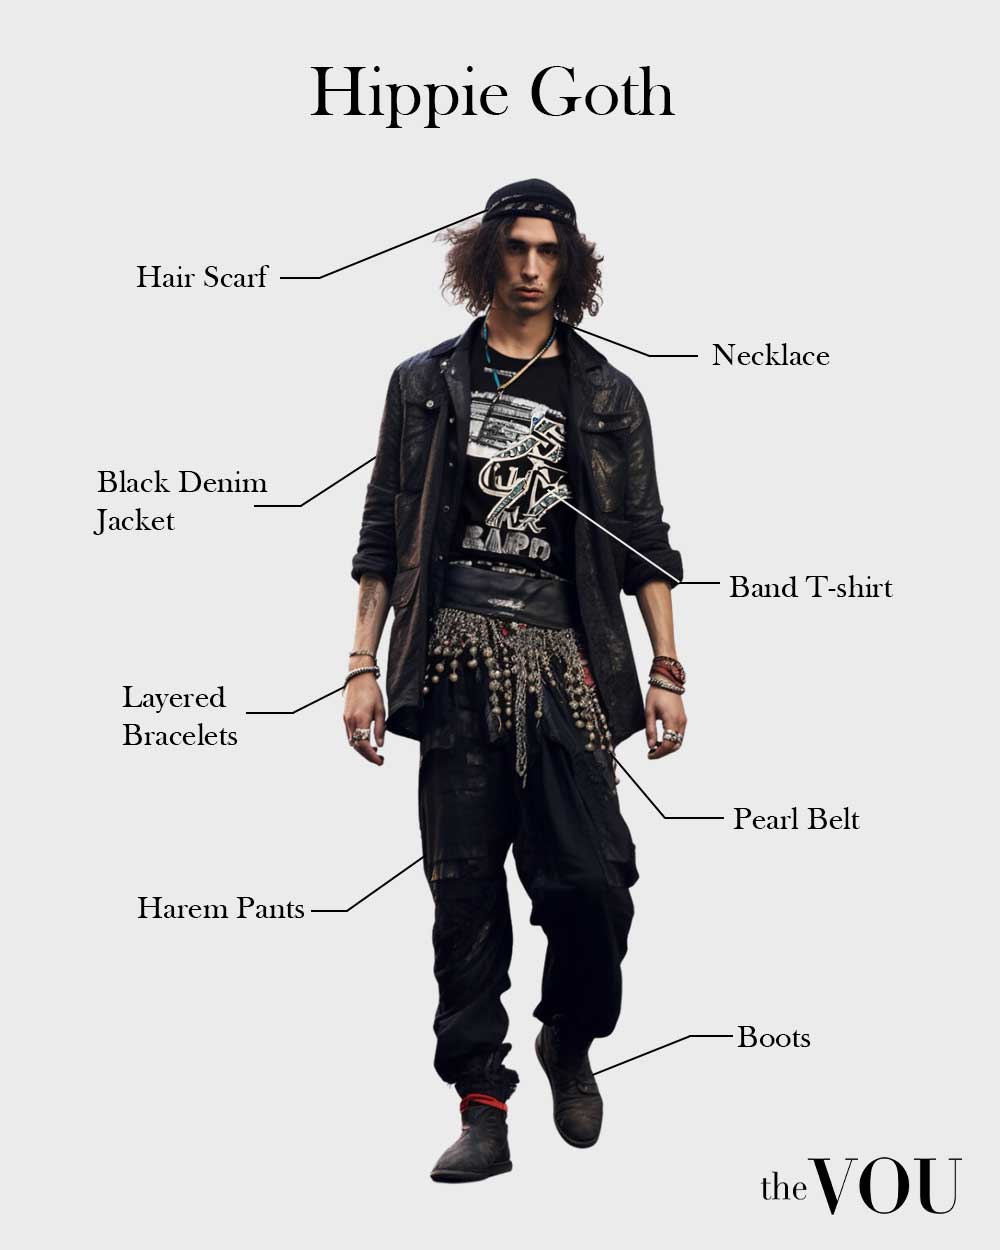 Hippie Goth outfit elements